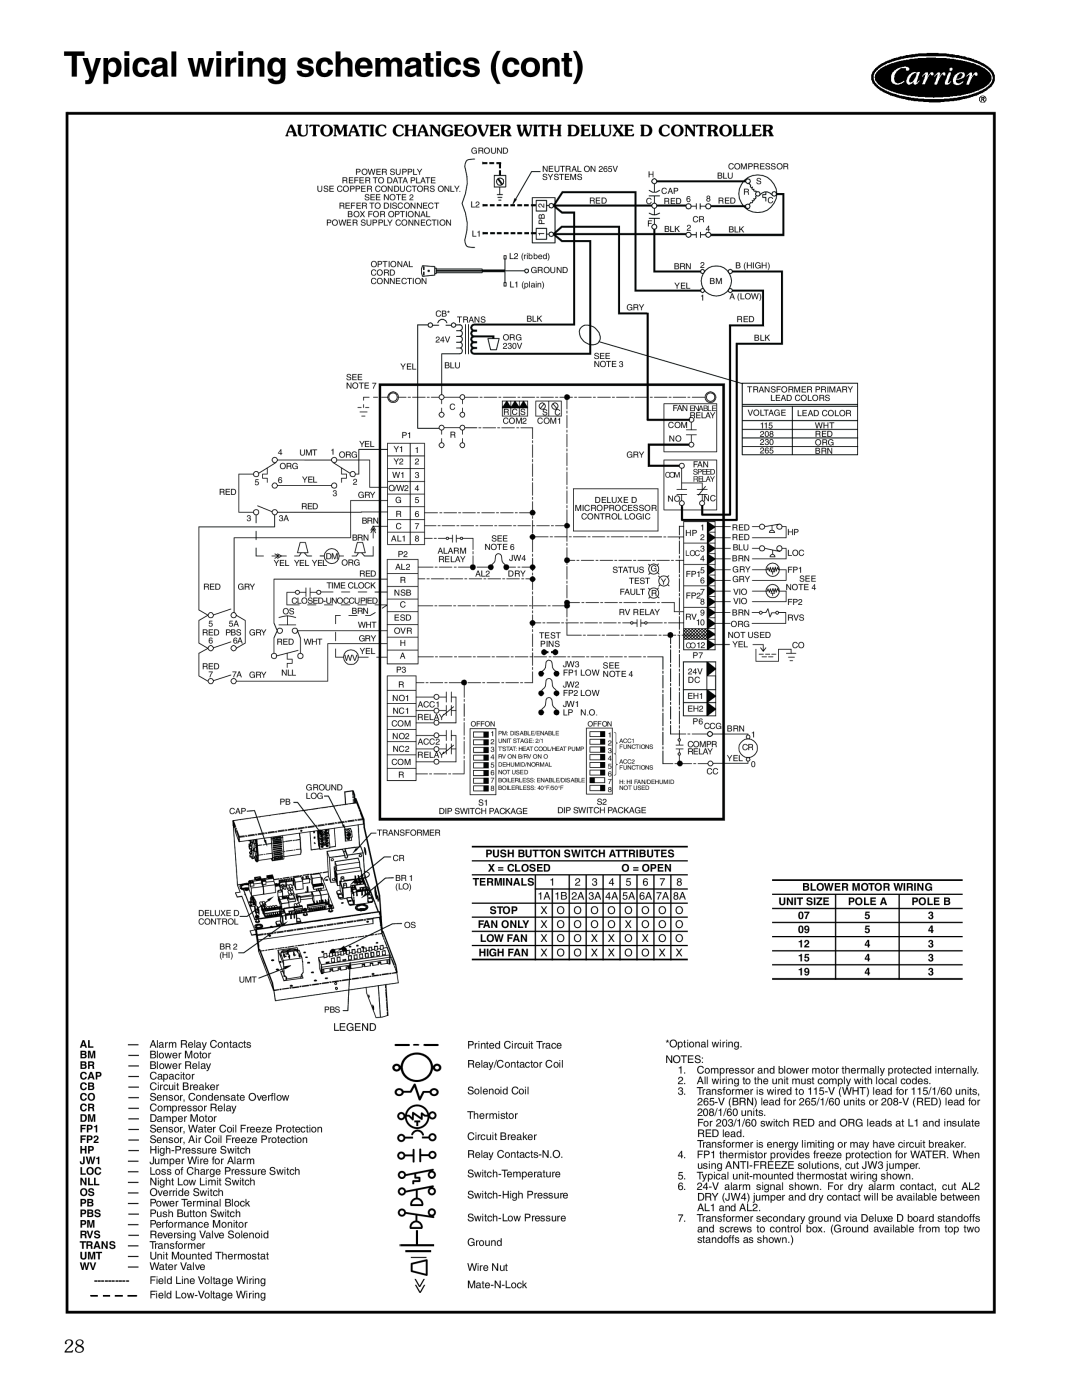 Carrier 50KQL-1PD manual Typical wiring schematics cont, Automatic Changeover With Deluxe D Controller, Blower Motor Wiring 